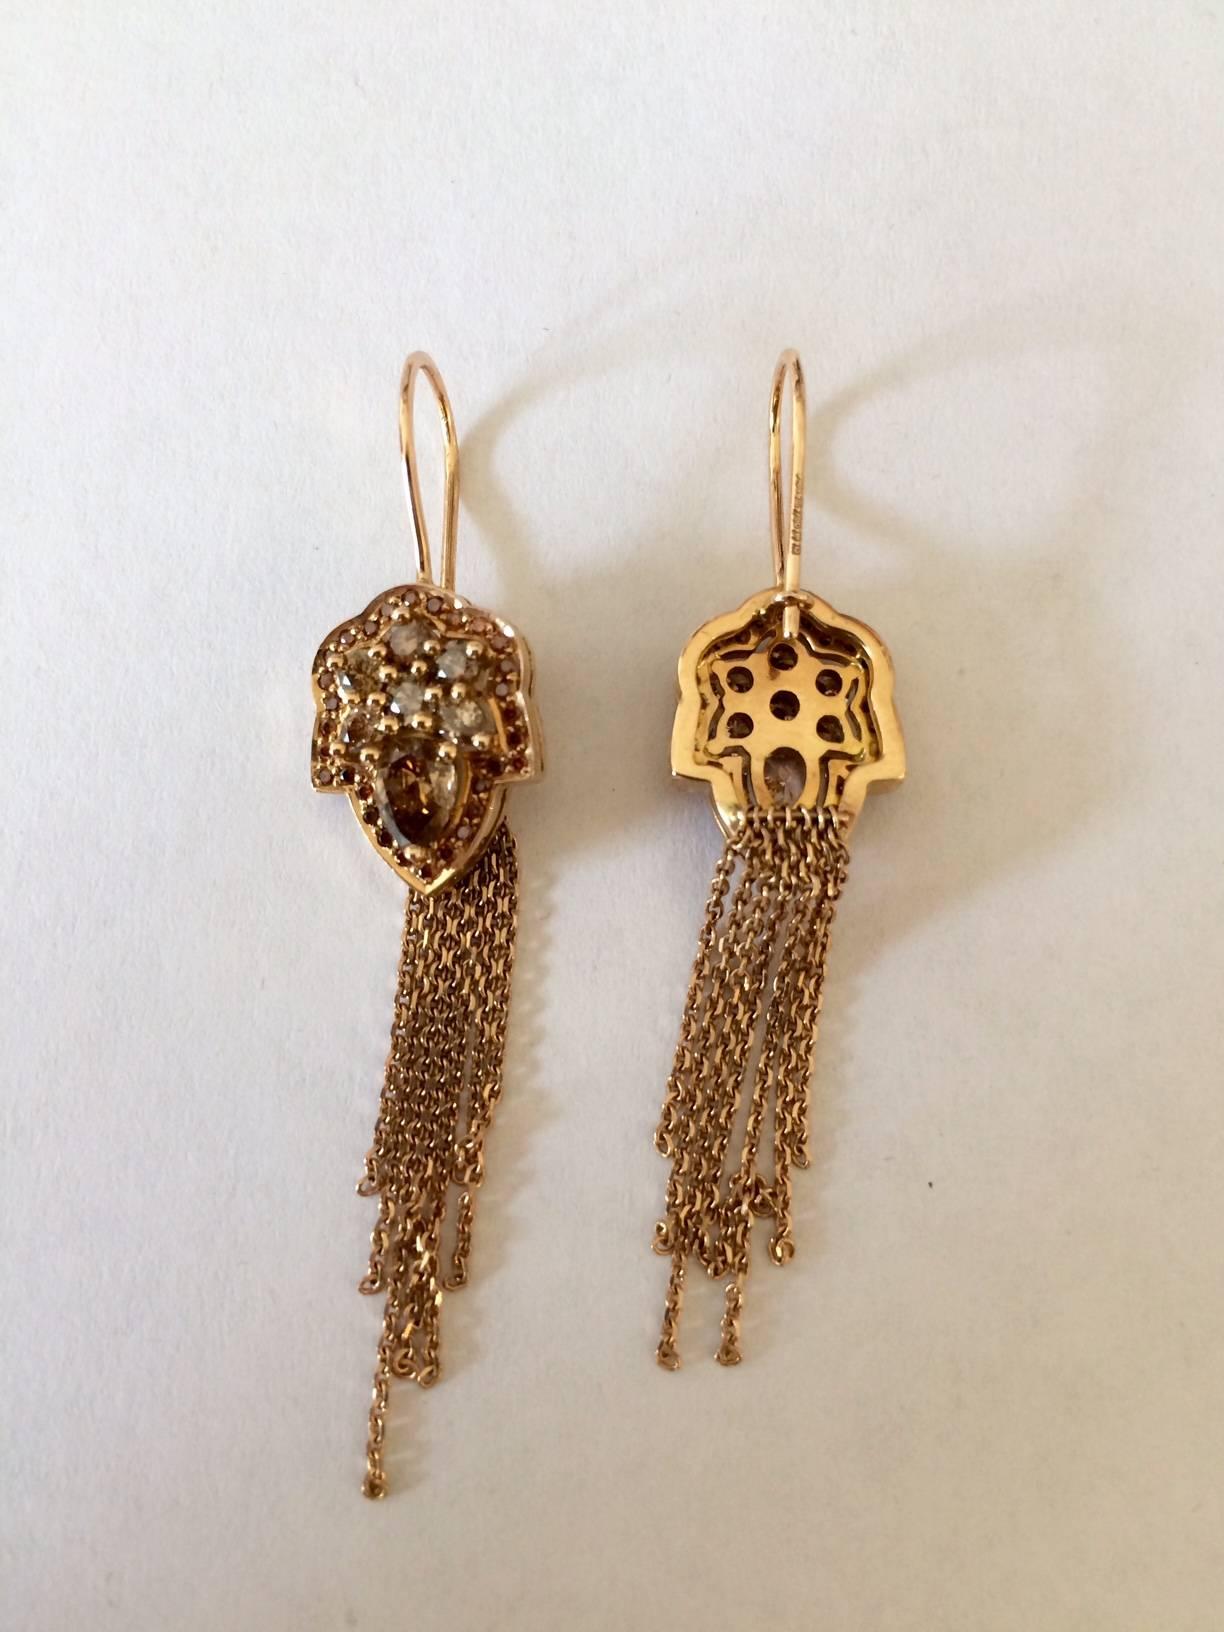 Ana De Costa Rose Gold Pear Round Cognac Diamond Drop Chain Earrings In New Condition For Sale In London, Kent